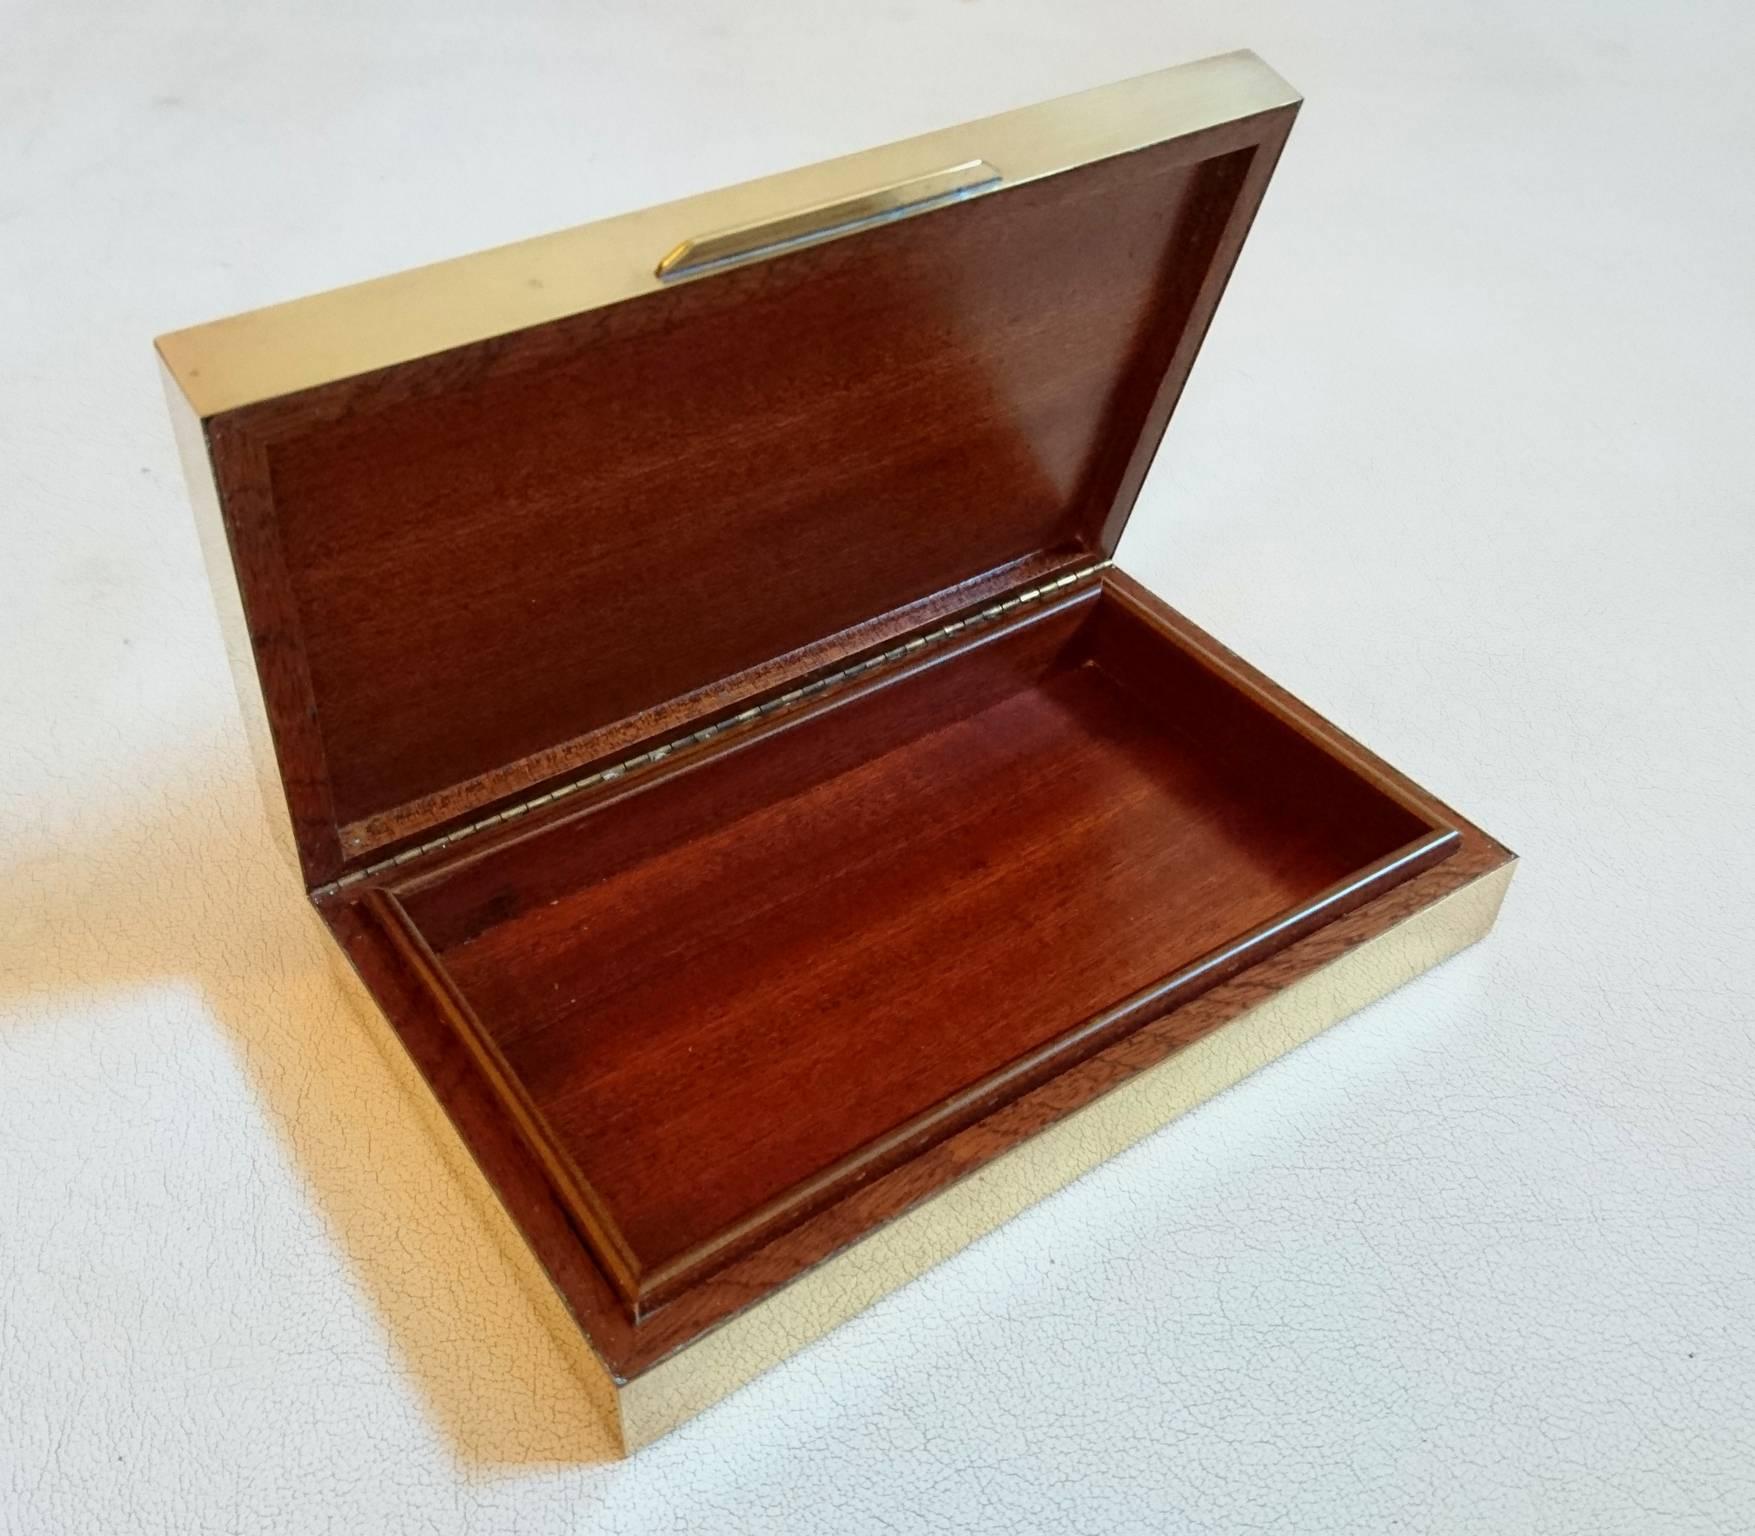 Box for trinkets or jewelry made in brass with a glass top covering a layer of rattan with an inside and bottom made in mahogany. The box is of a high quality finish and closes perfectly.